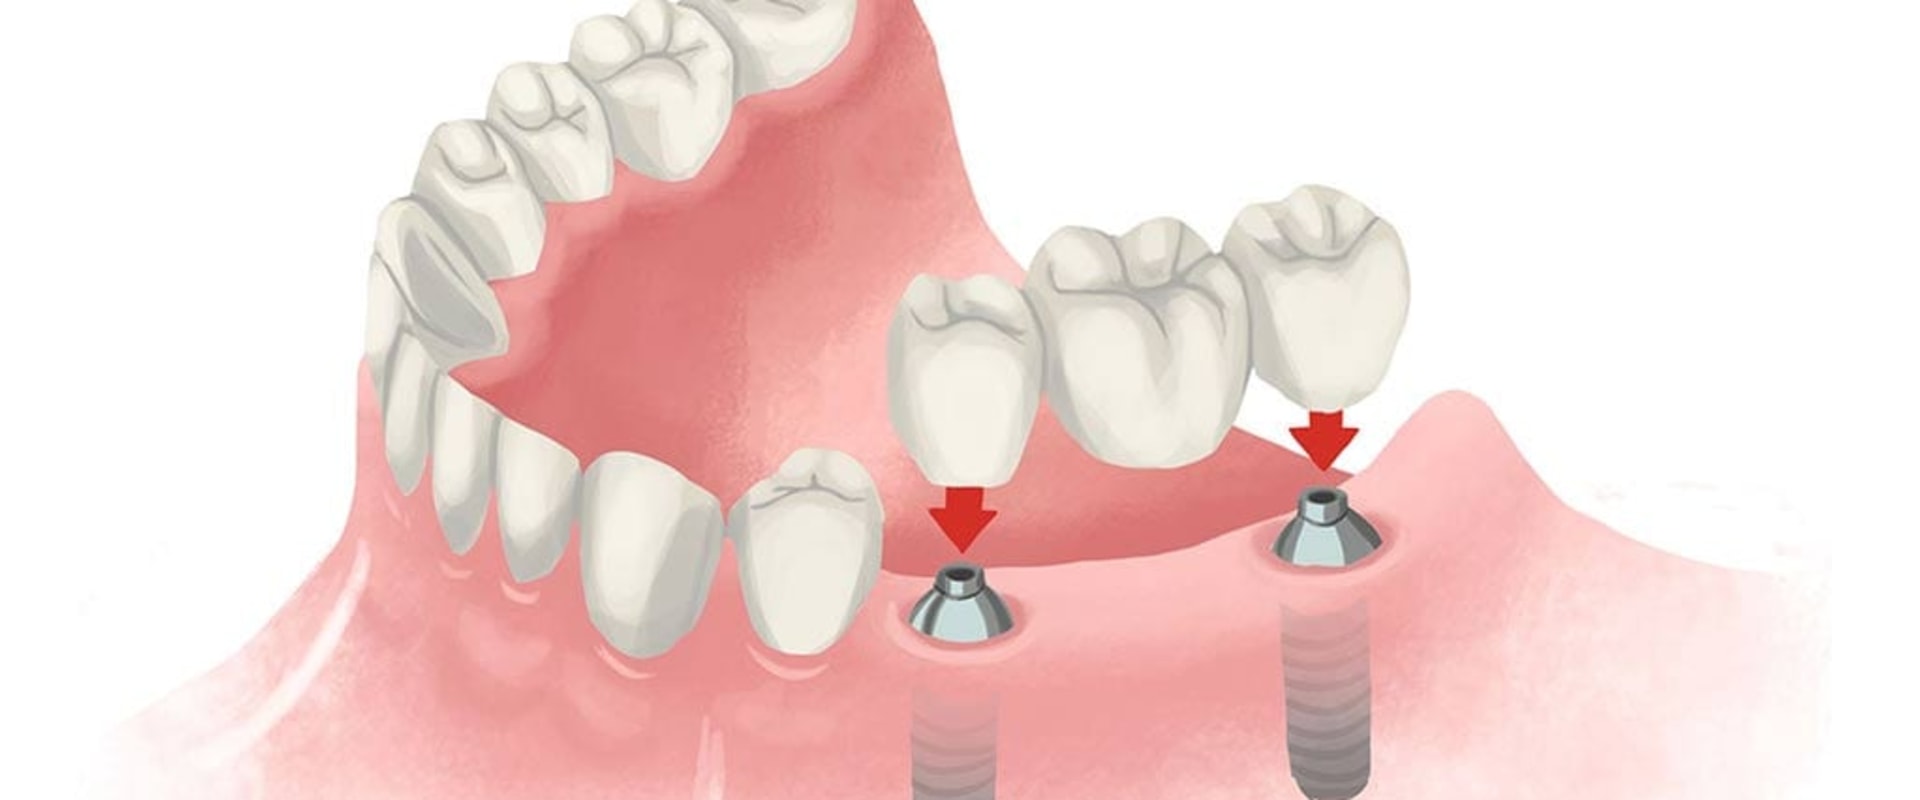 How Often Should You Get Your Dental Implants Checked? A Guide for Patients